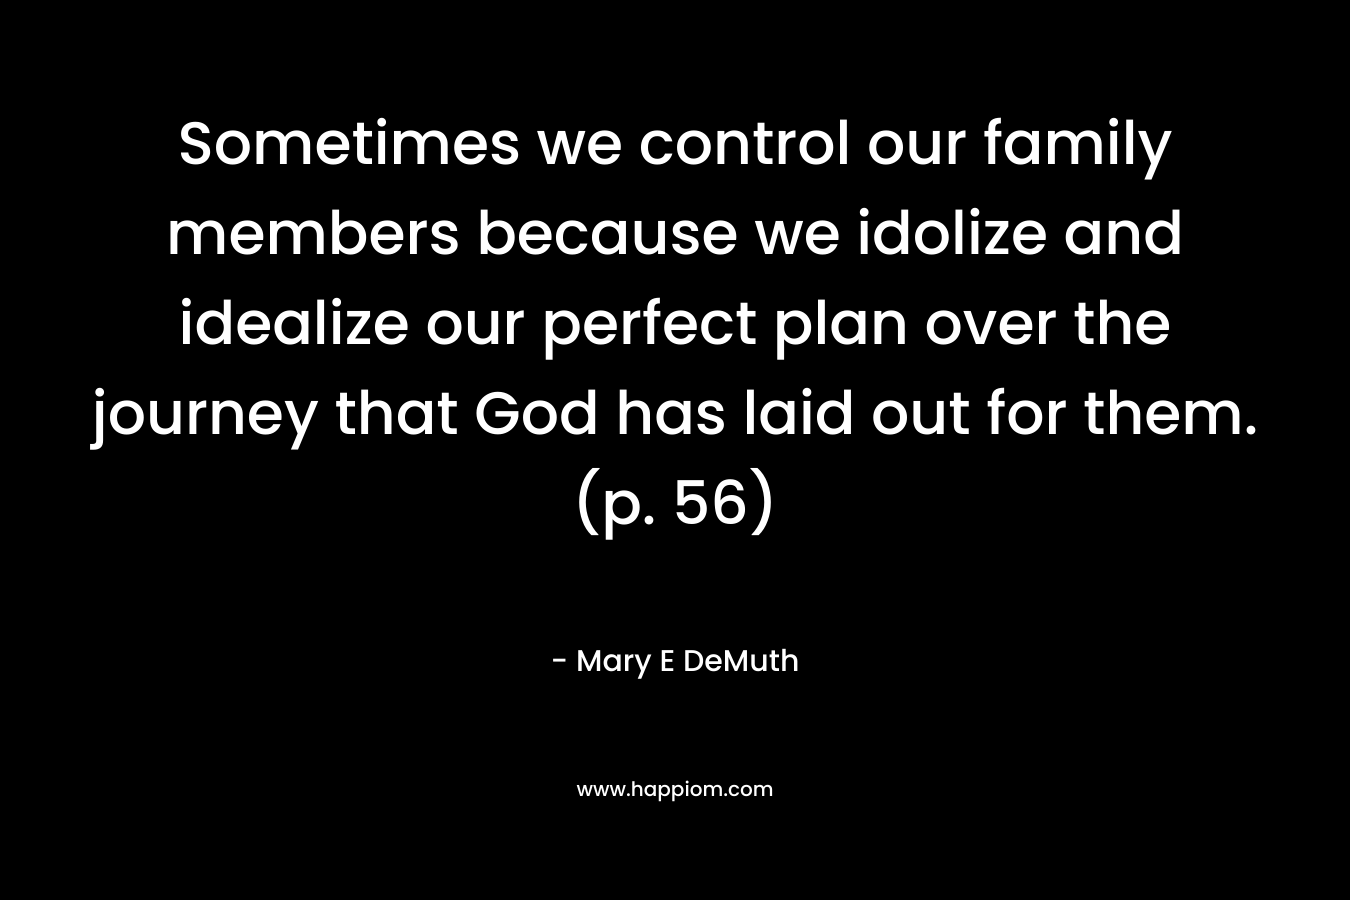 Sometimes we control our family members because we idolize and idealize our perfect plan over the journey that God has laid out for them. (p. 56) – Mary E DeMuth